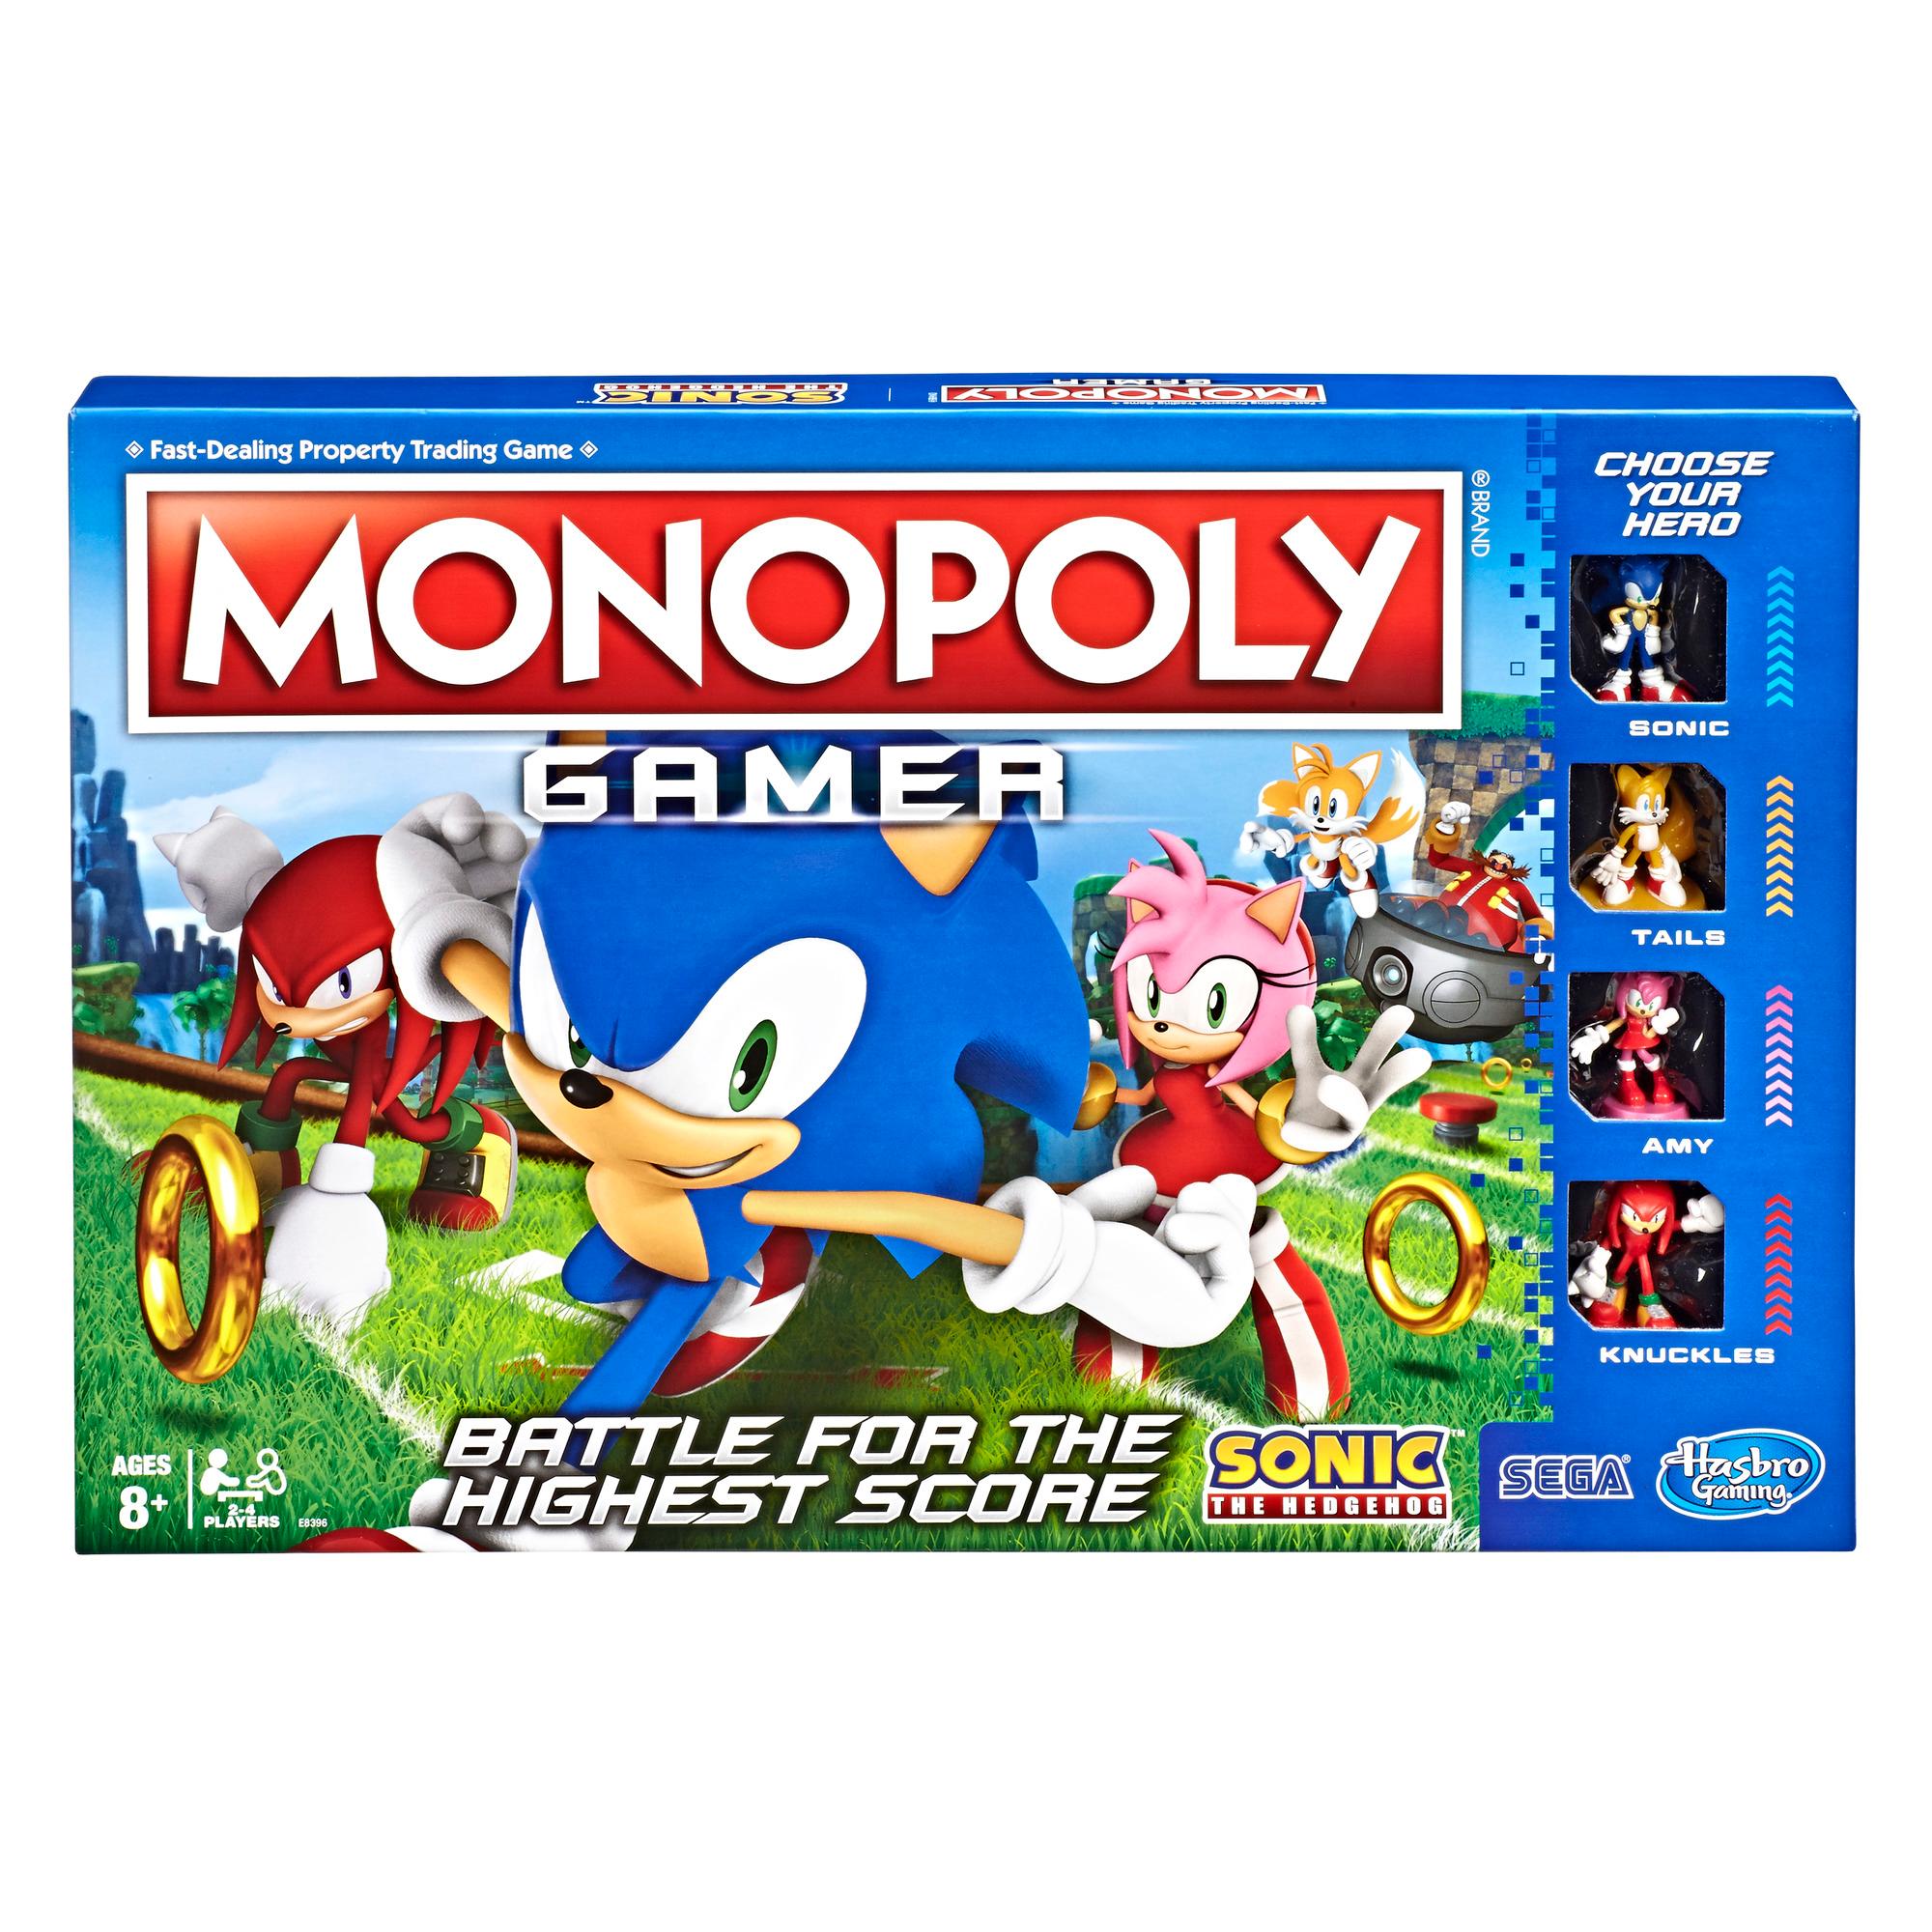 Monopoly Gamer Sonic the Hedgehog Edition Board Game